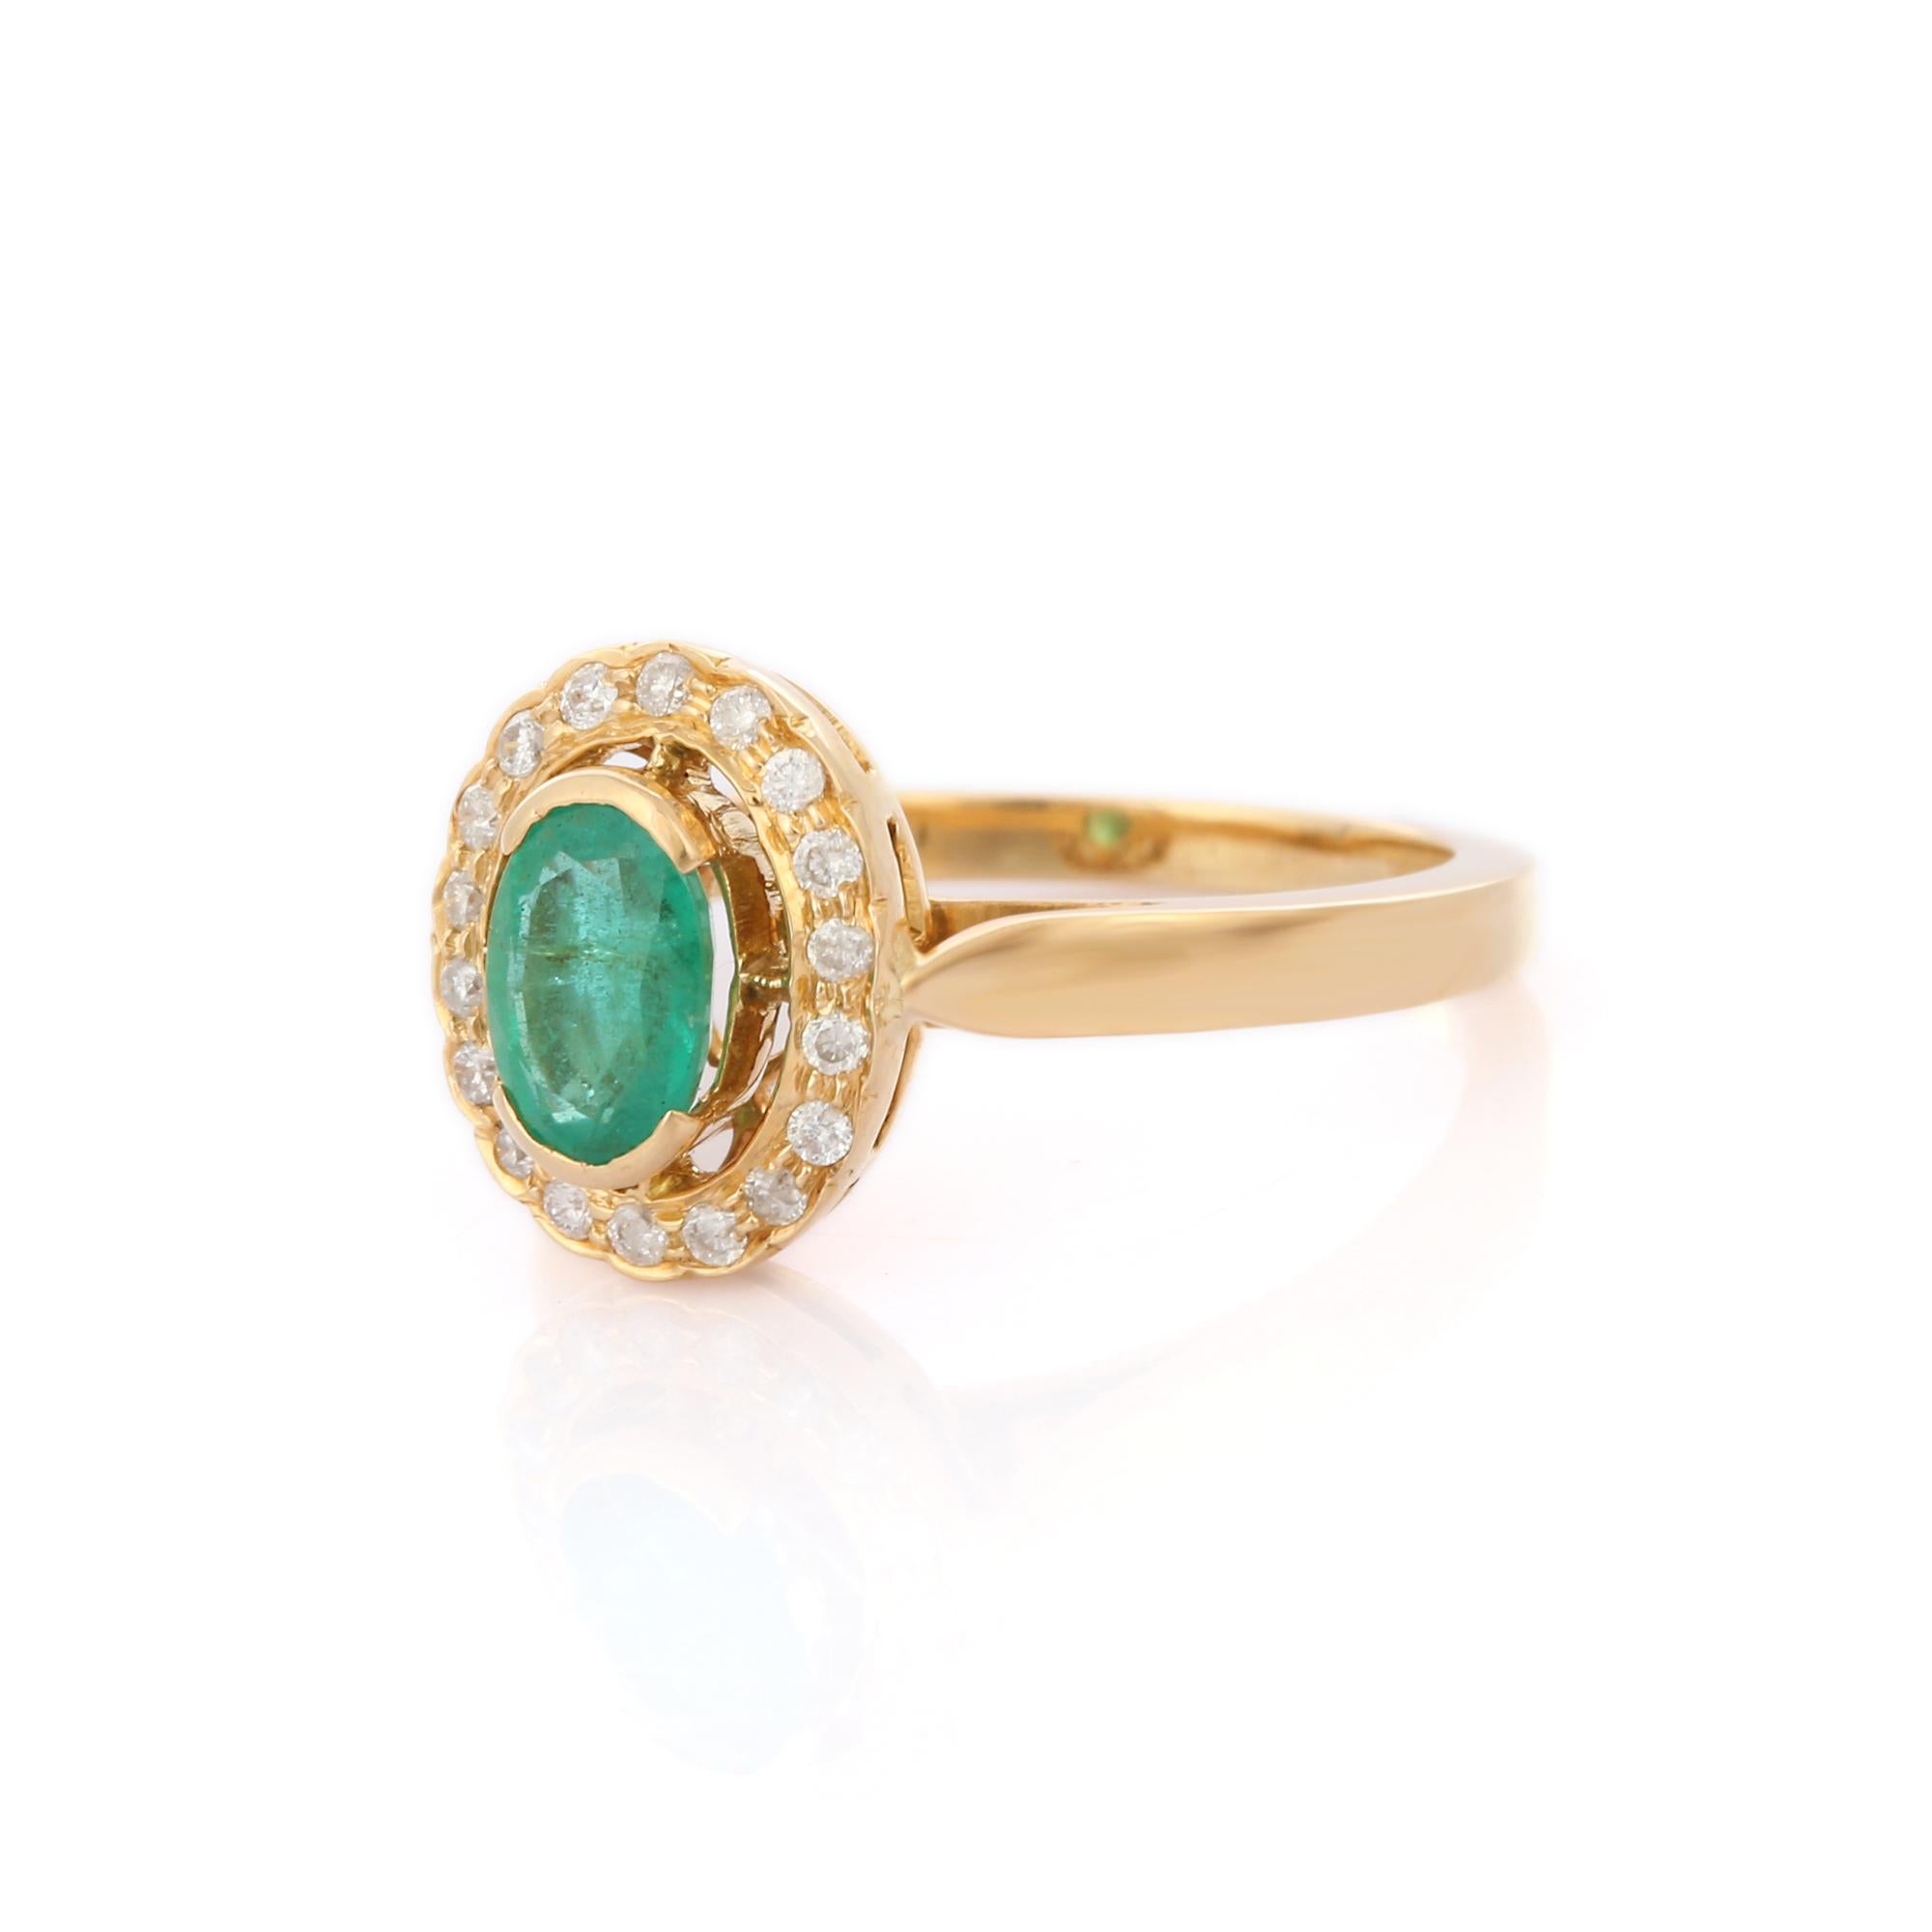 For Sale:  Contemporary Half Bezel Set Emerald and Halo Diamond Ring in 18K Yellow Gold 3